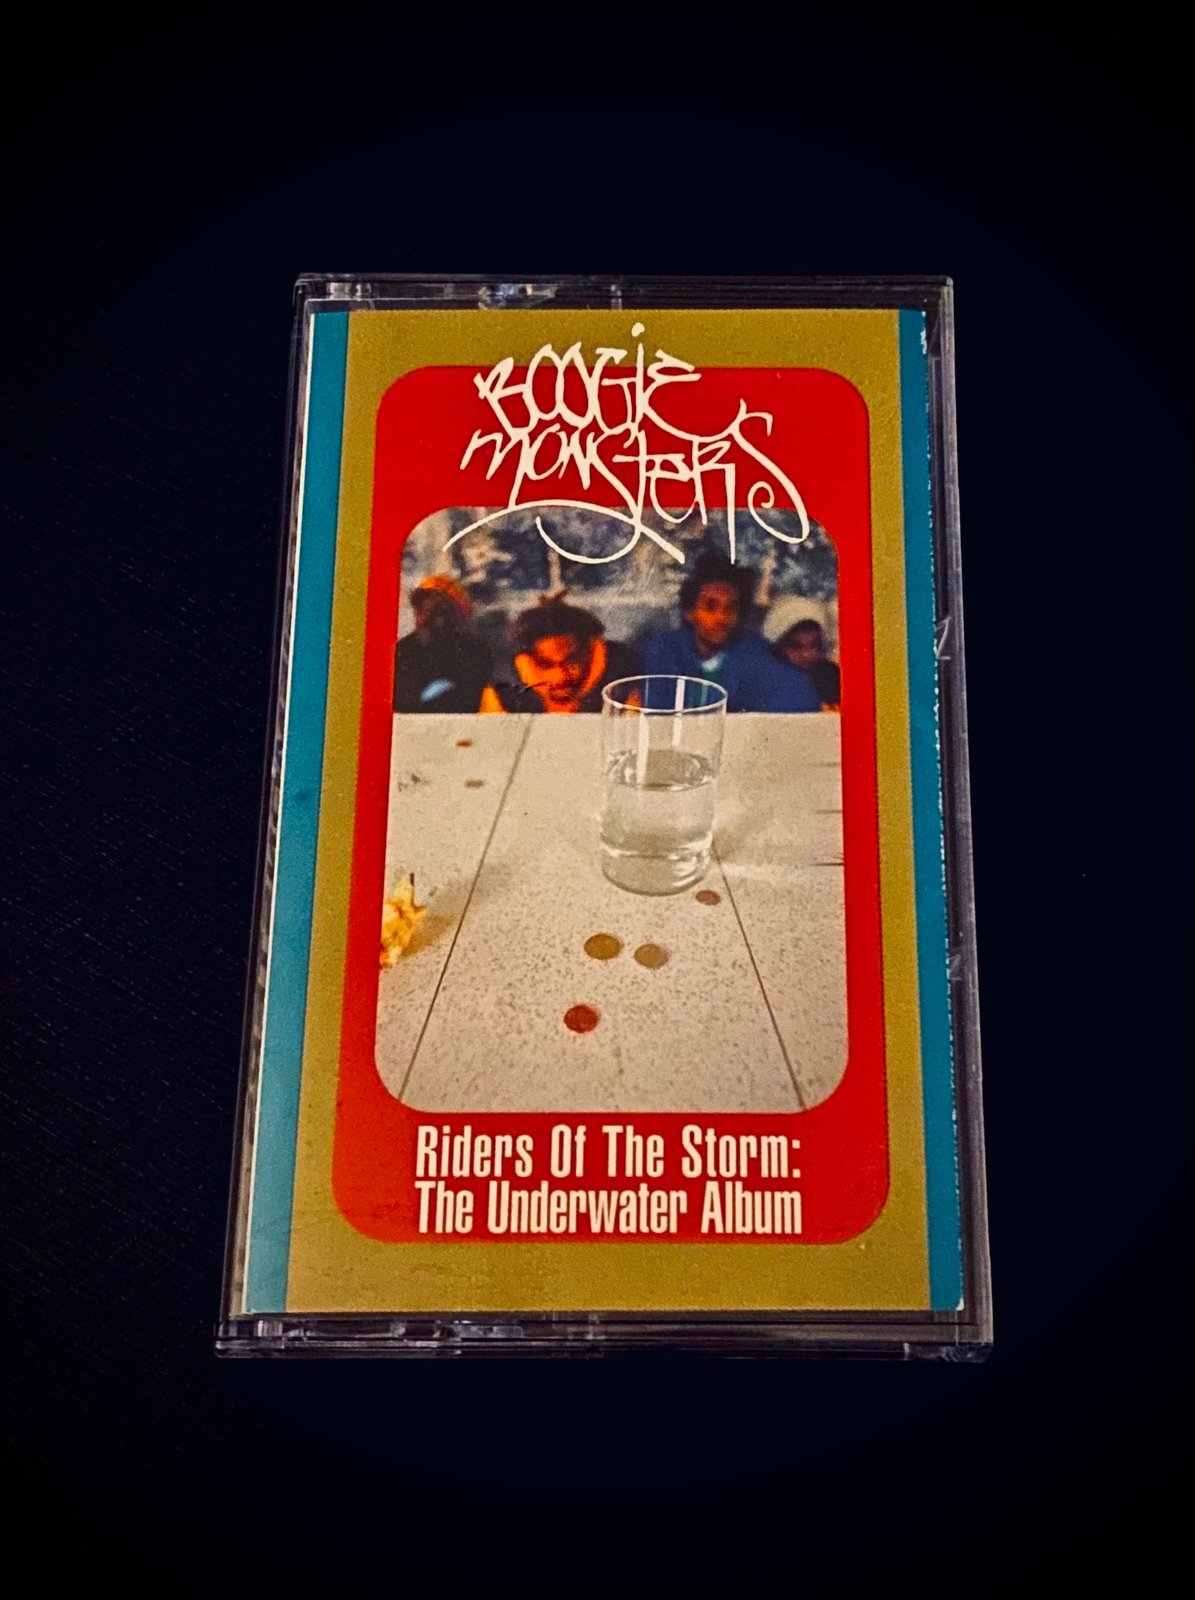 The BOOGIE MONSTERS “Riders Of The Storm:The Underwater Album 